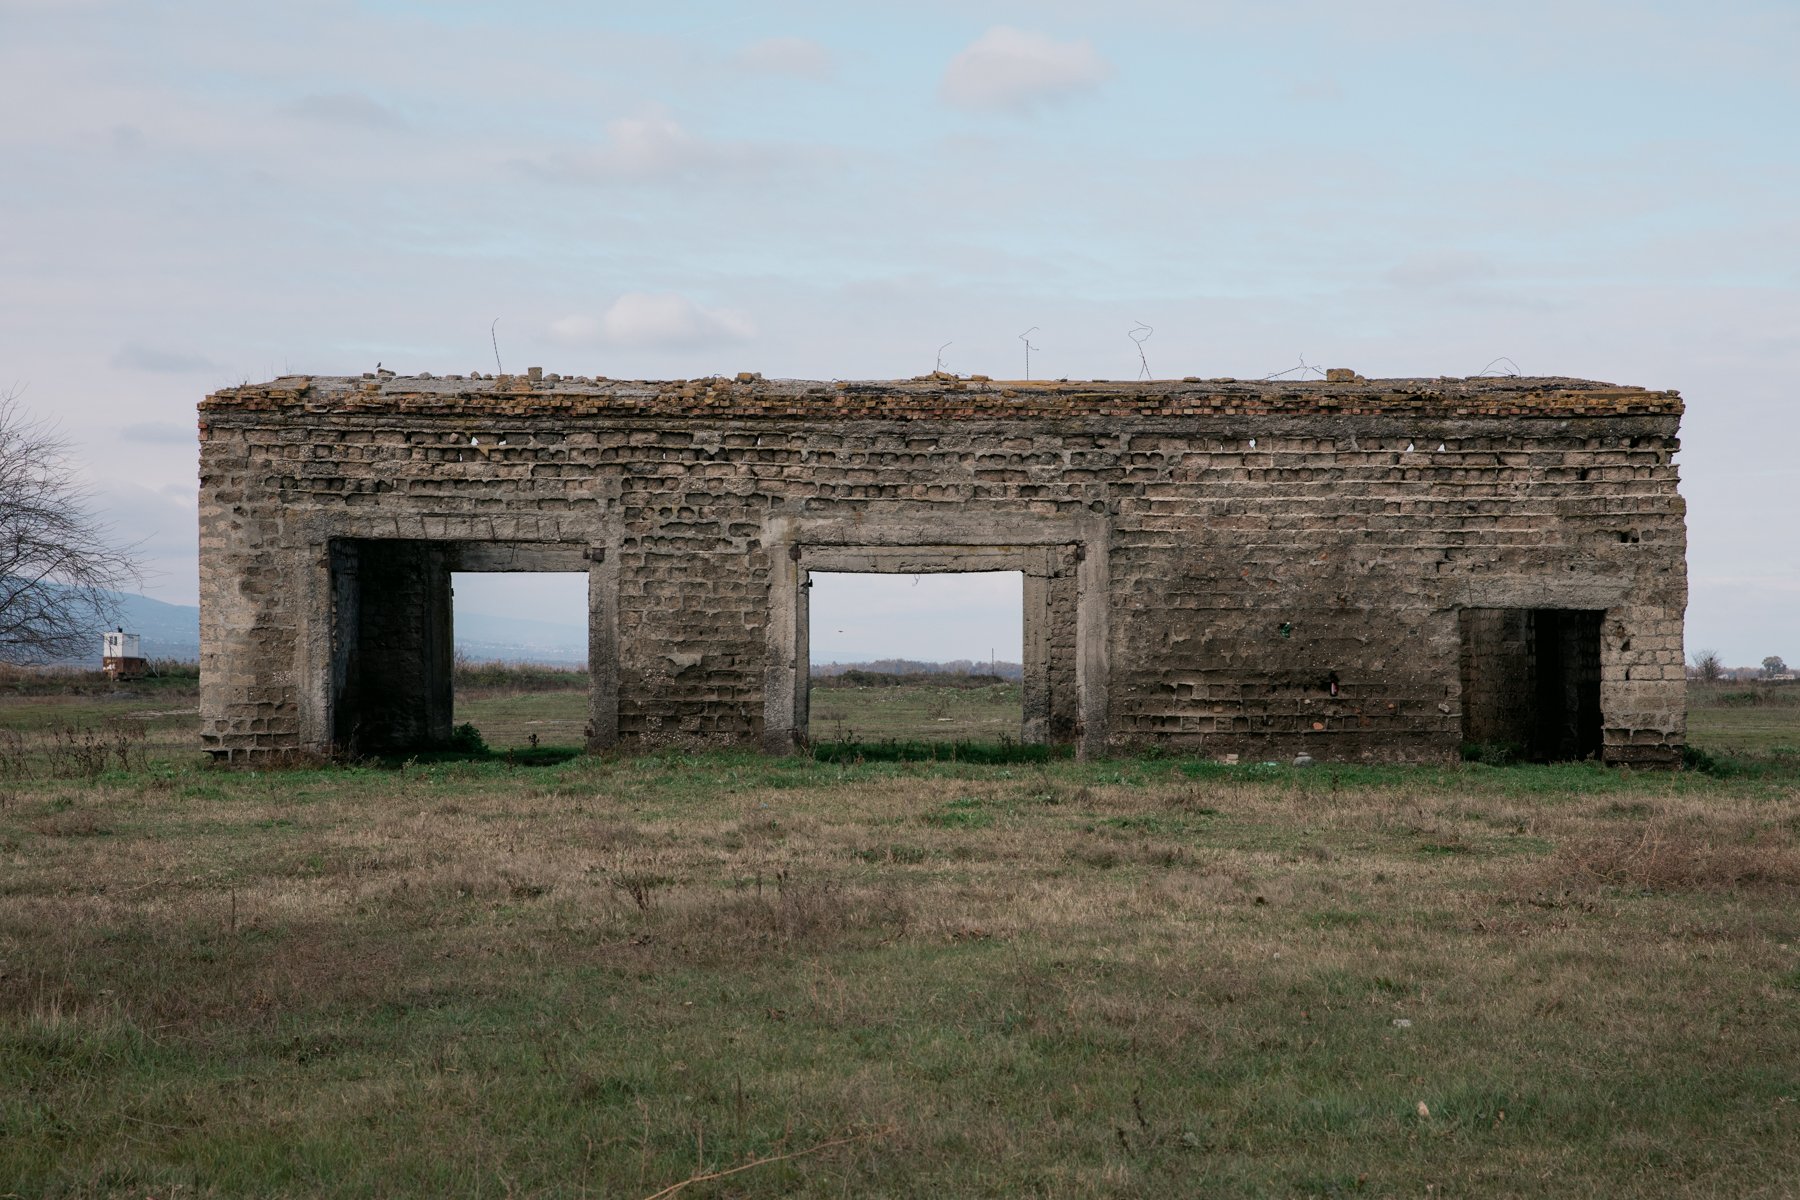  A building at the disused airfield in Tsnori. 